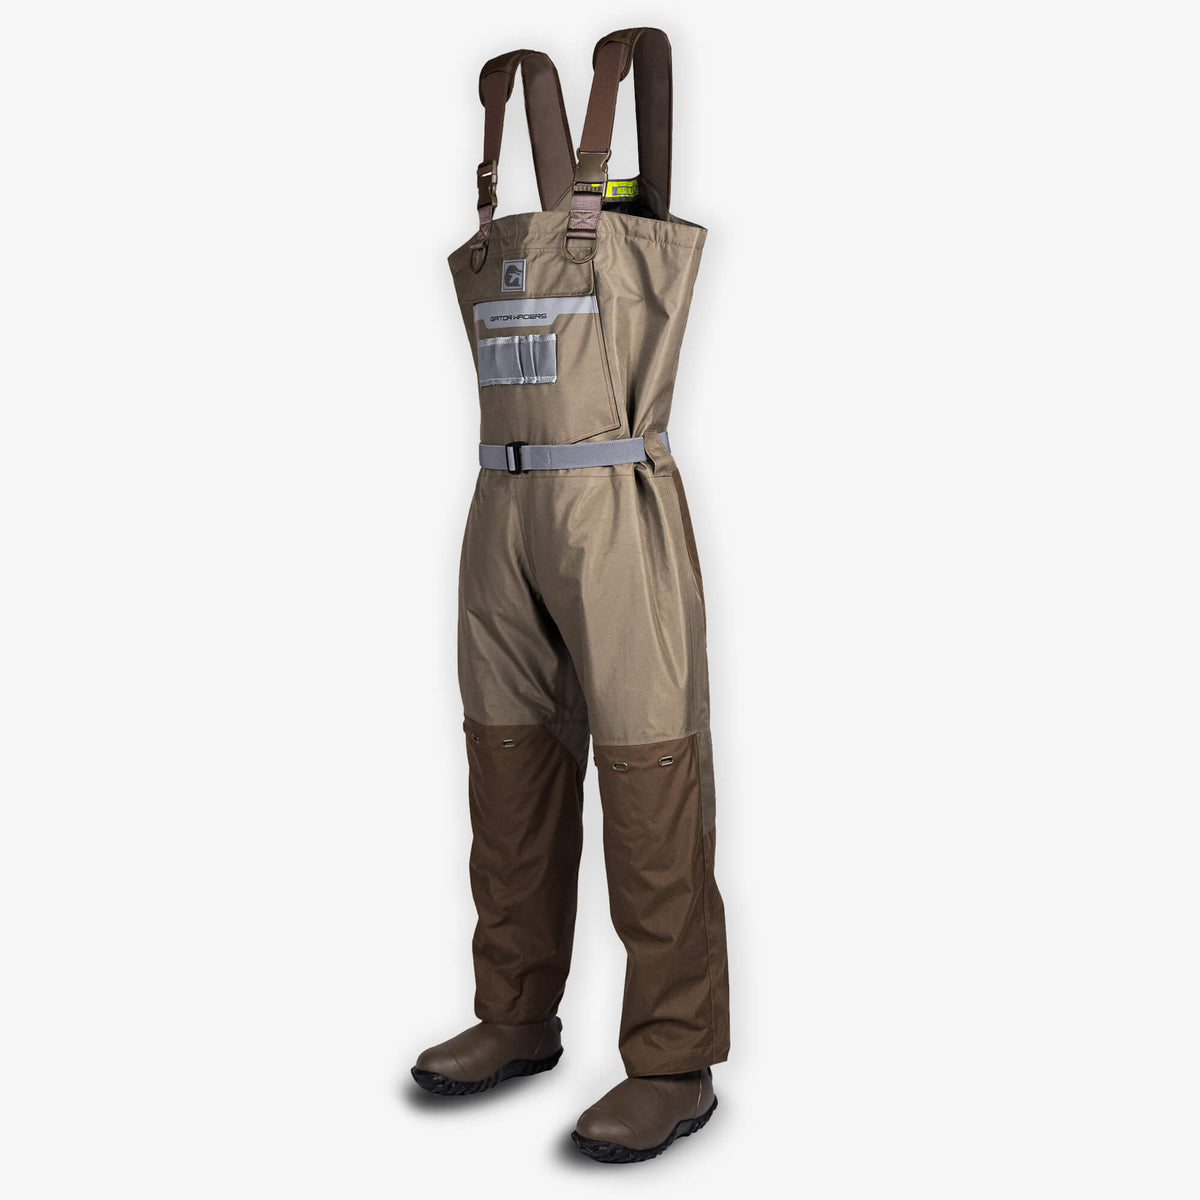 Shield Insulated Waders, Men's - 7 Brown